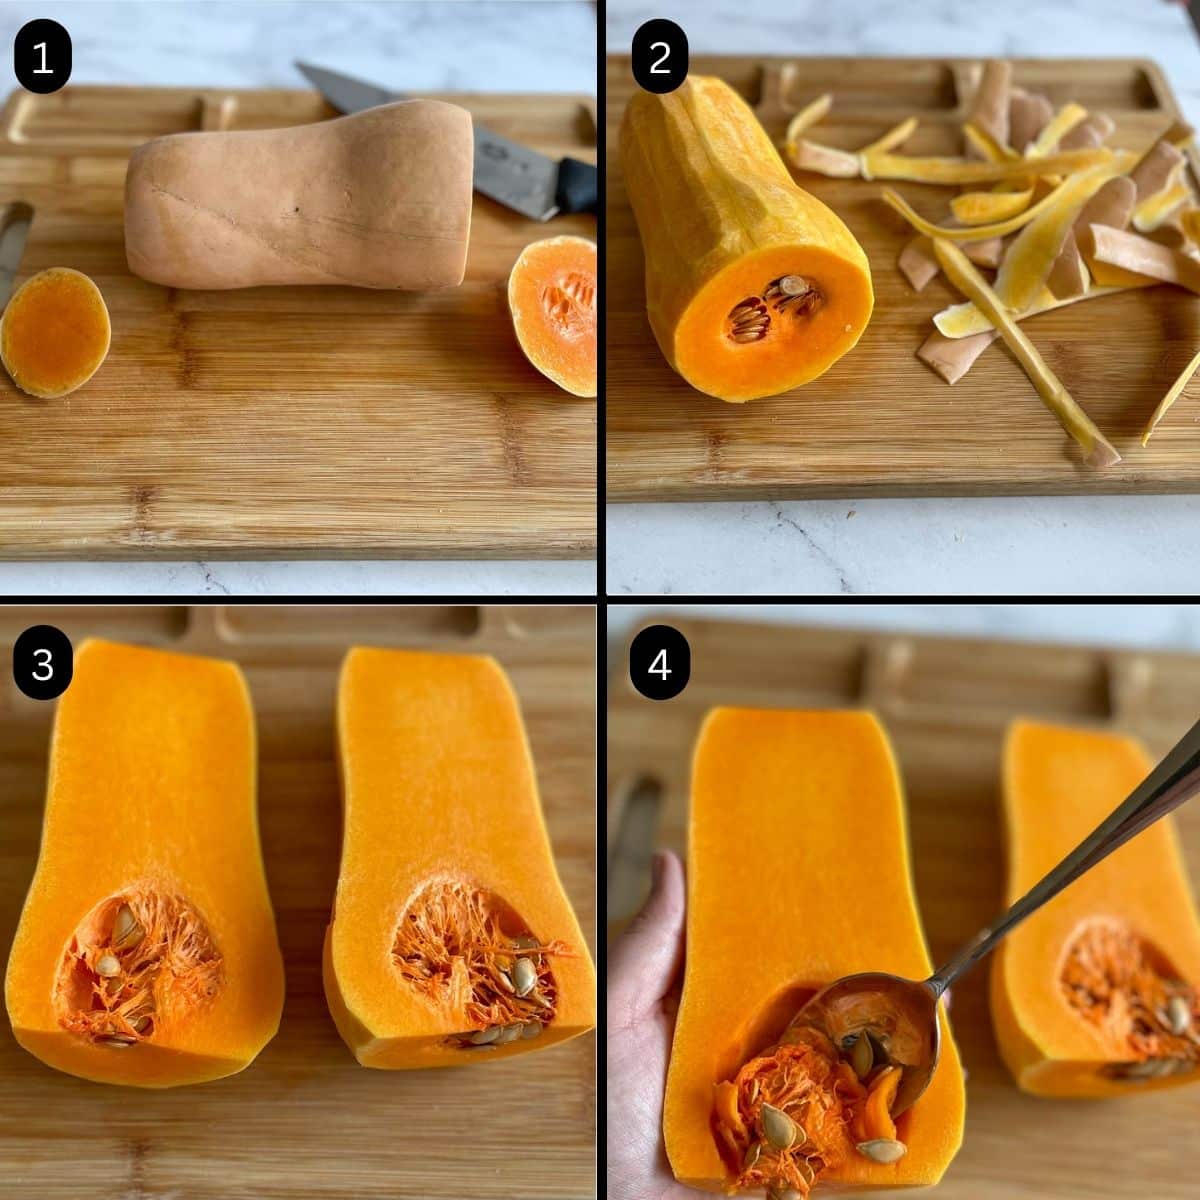 Steps 1 through 4 of how to properly cut a butternut squash are shown.